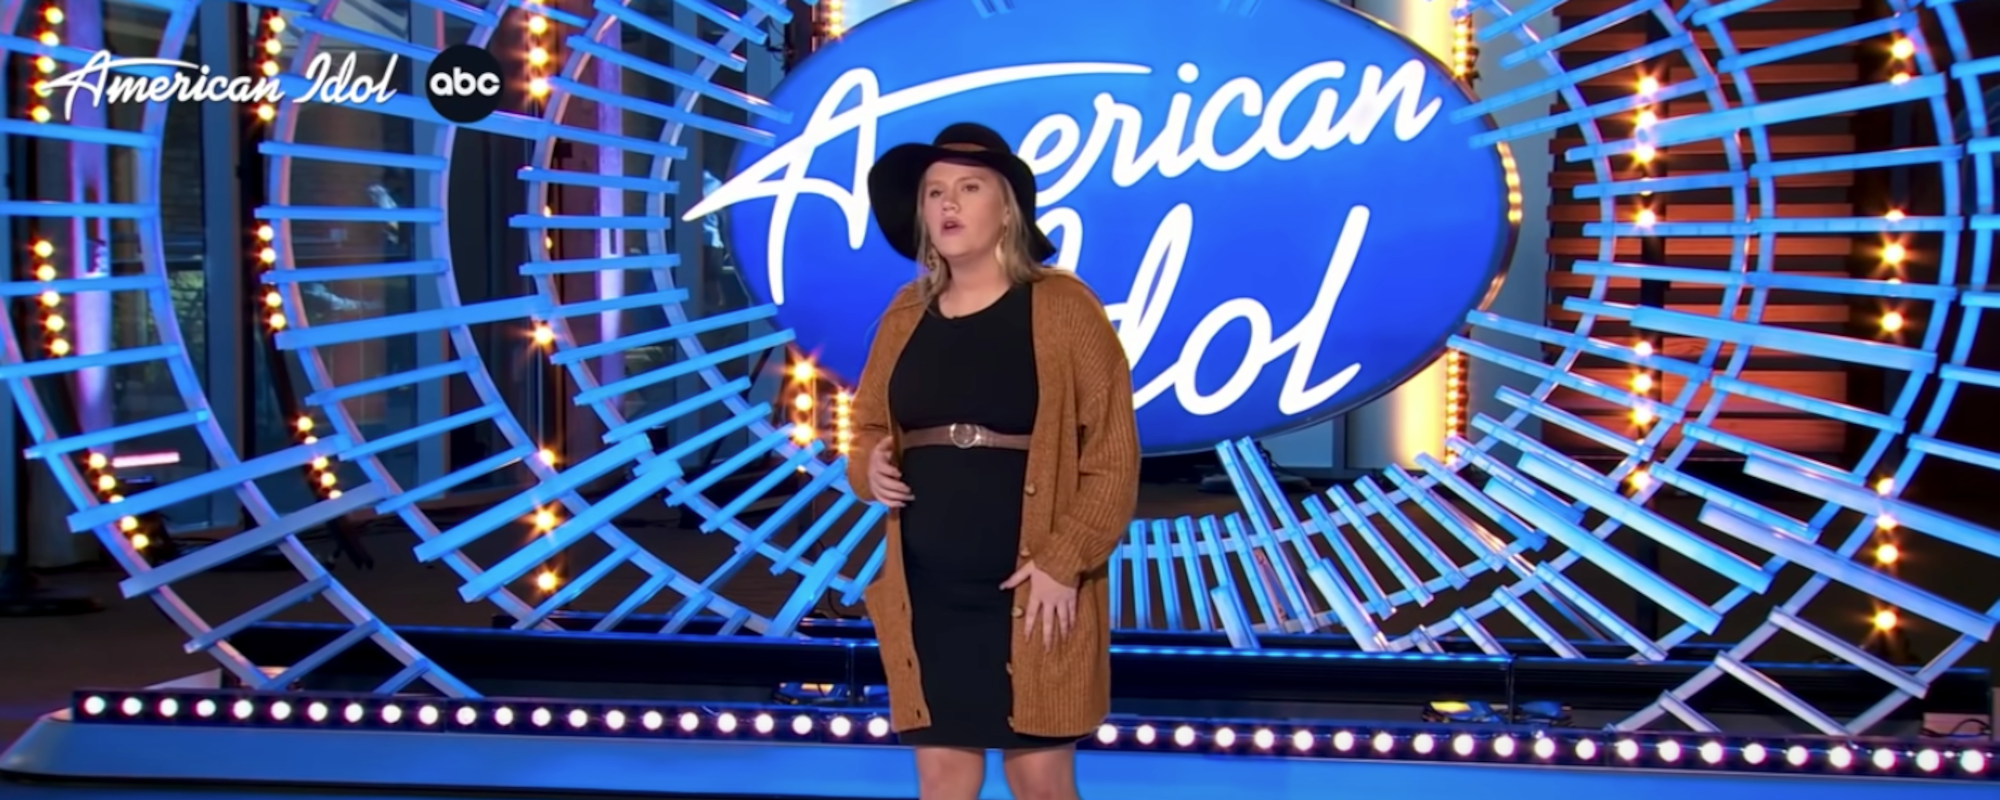 ‘American Idol’ Contestant Haley Slaton Proves Being a Soon-To-Be Mom Won’t Stop Her From Chasing Her Dreams